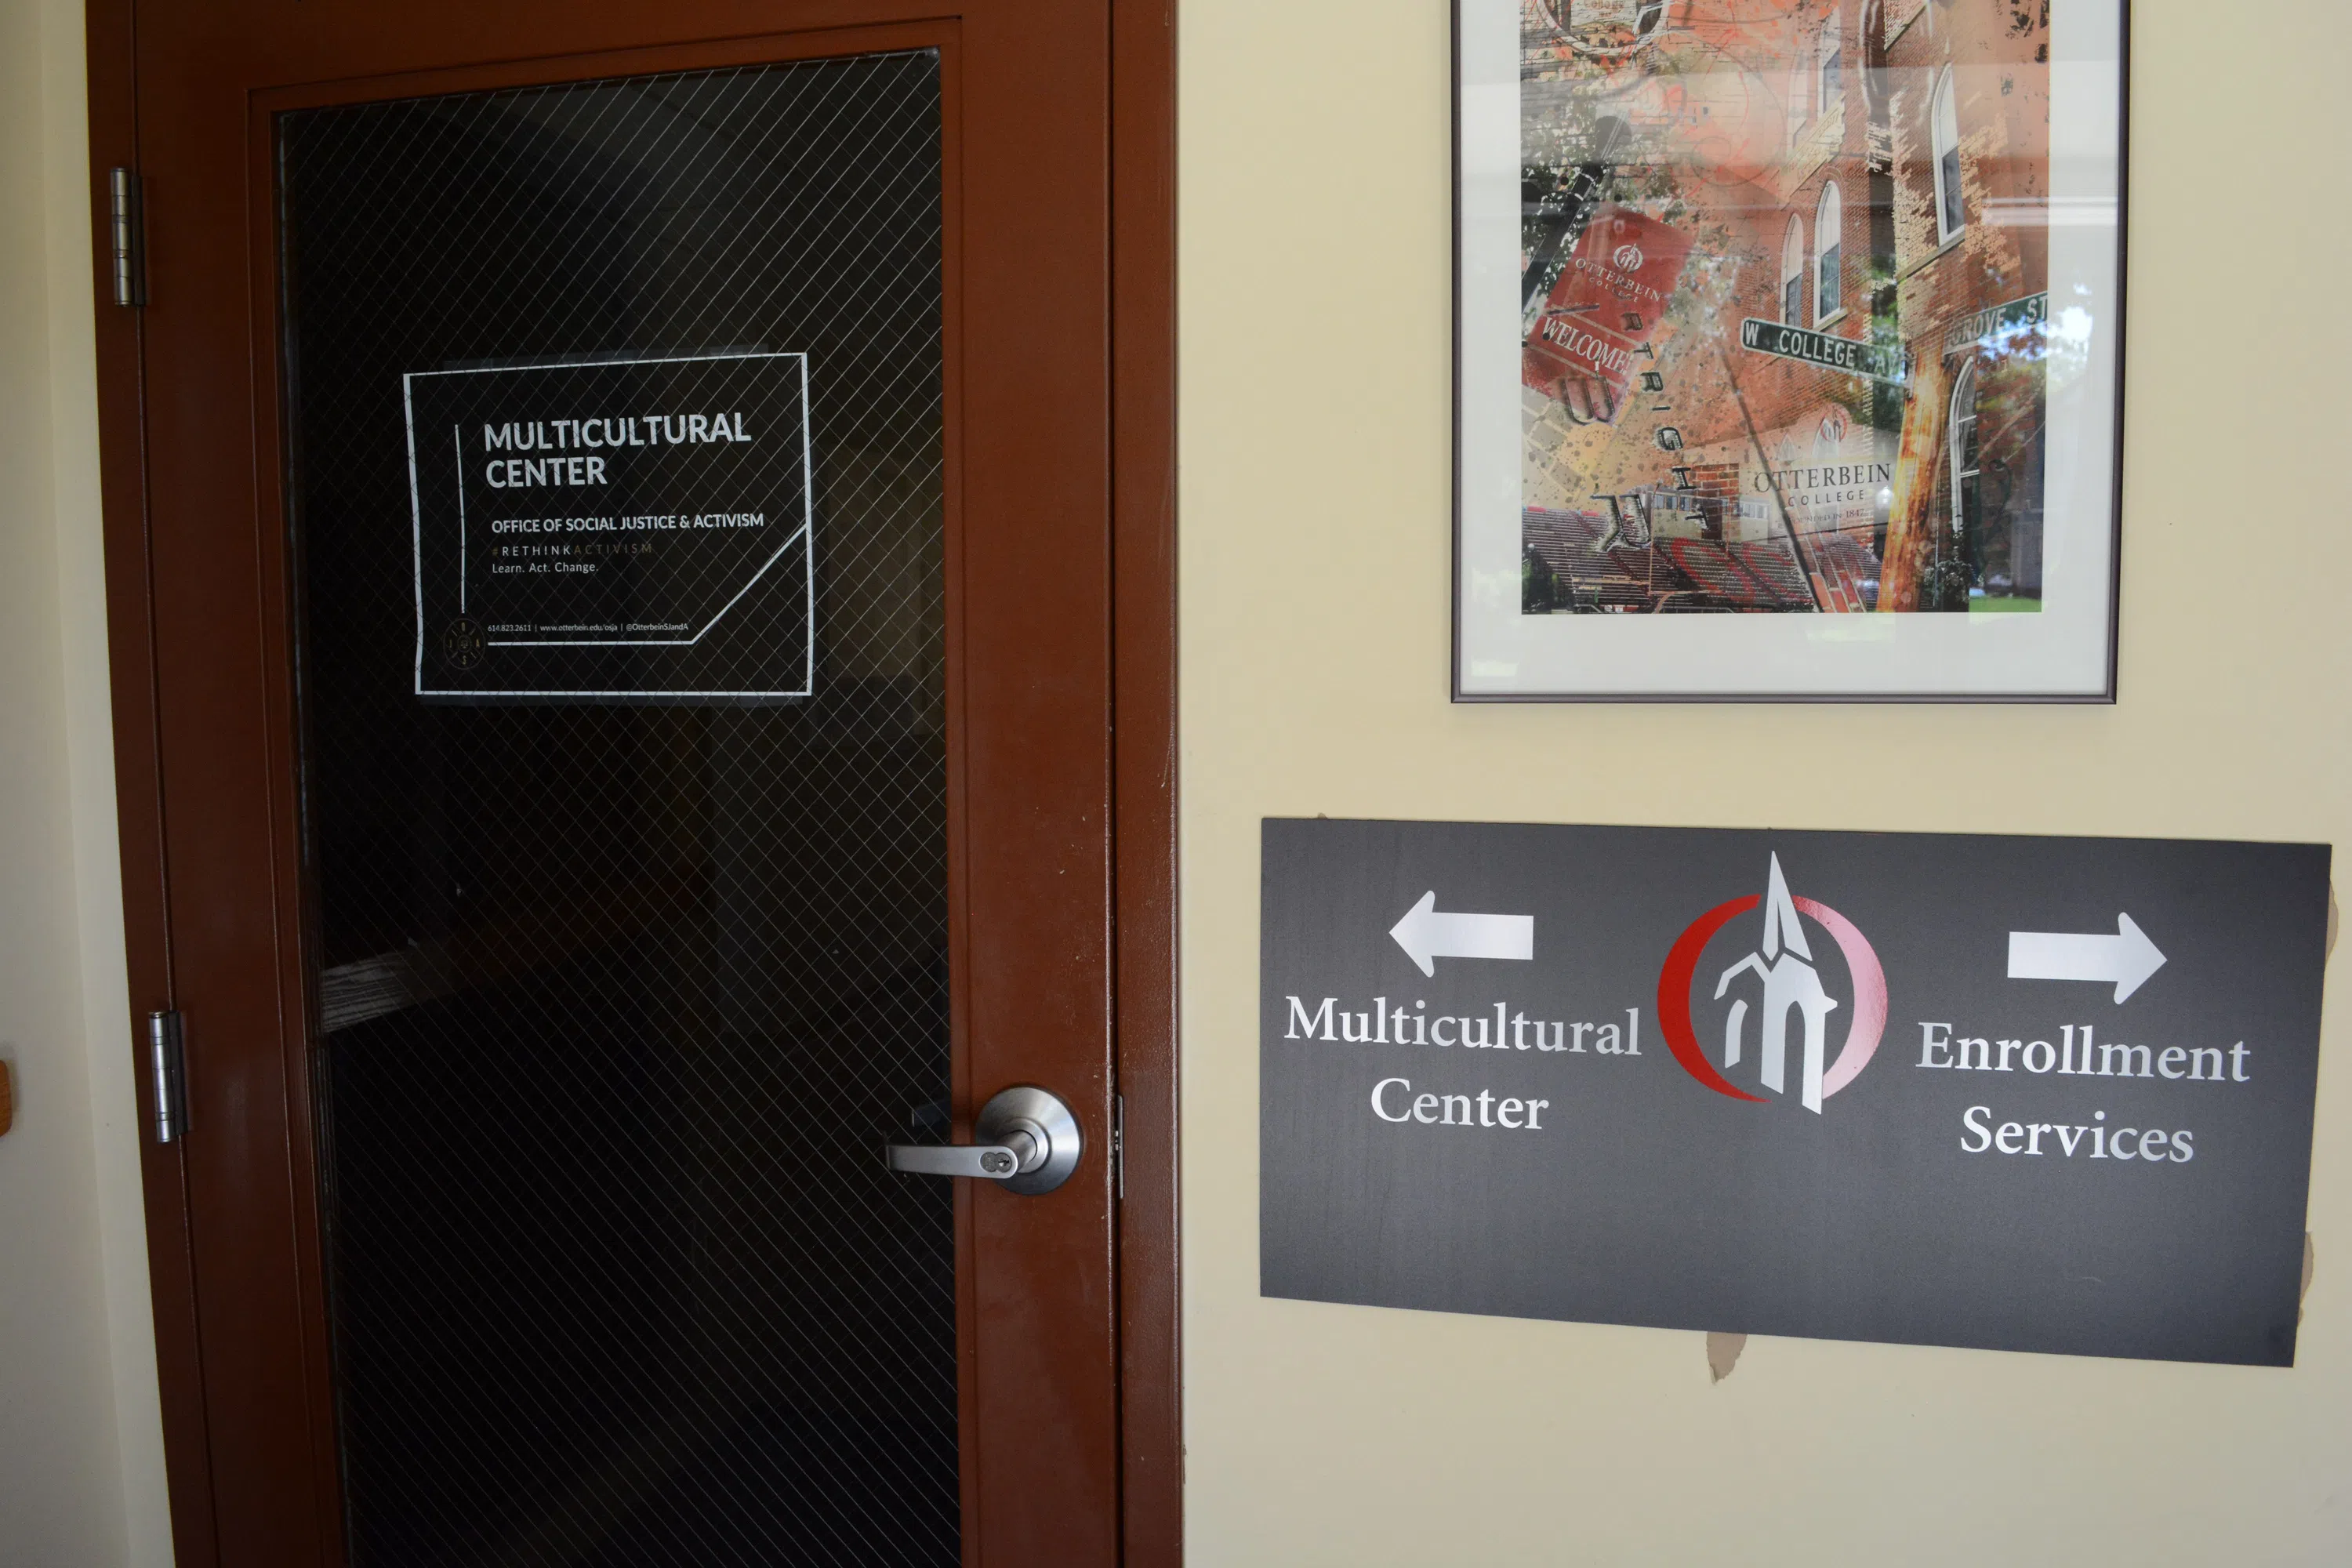 An view inside the Barlow Hall vestibule shows the front door of the Office of Social Justice & Activism.